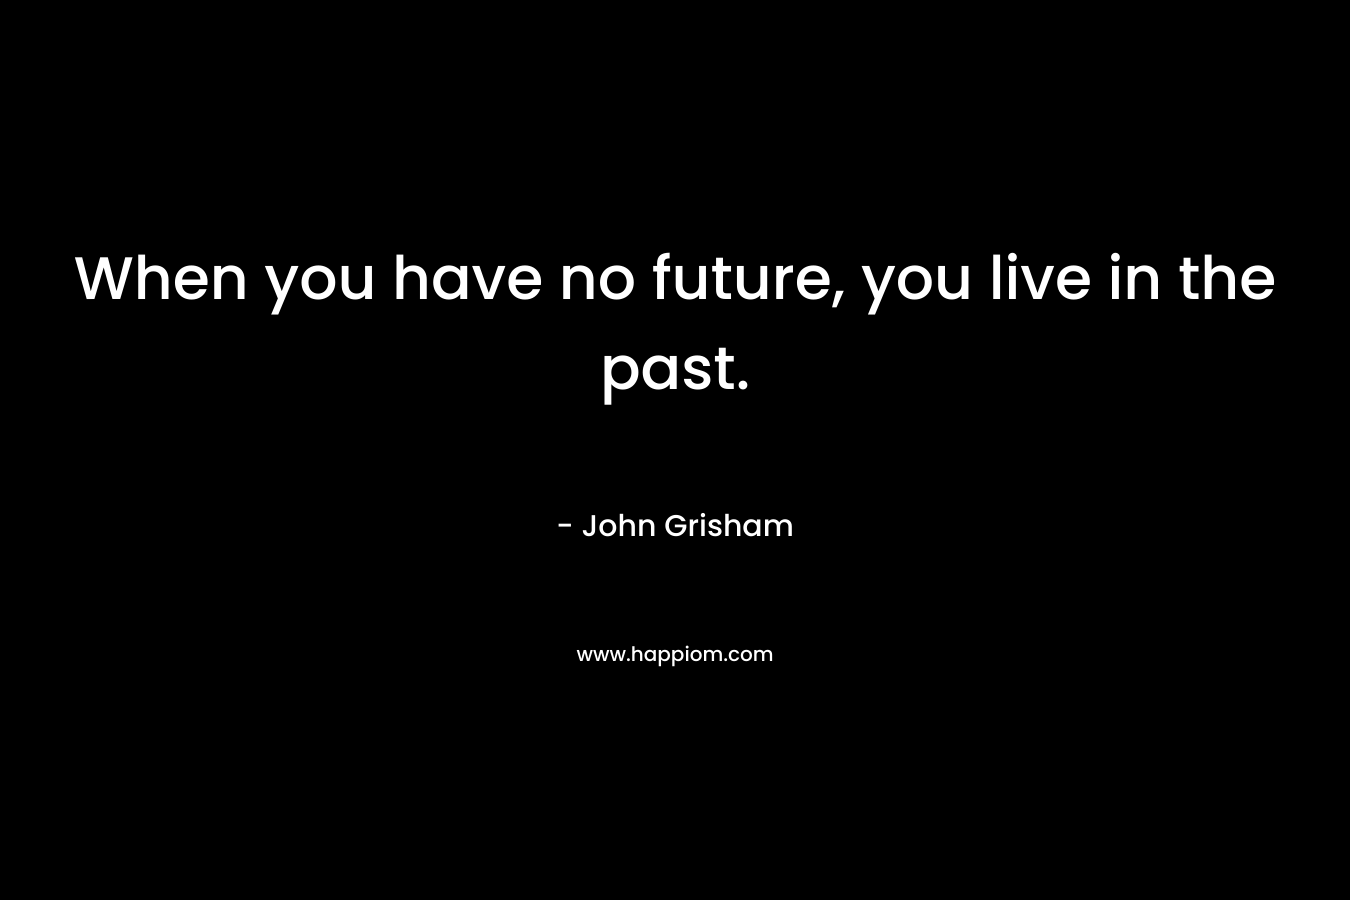 When you have no future, you live in the past. – John Grisham